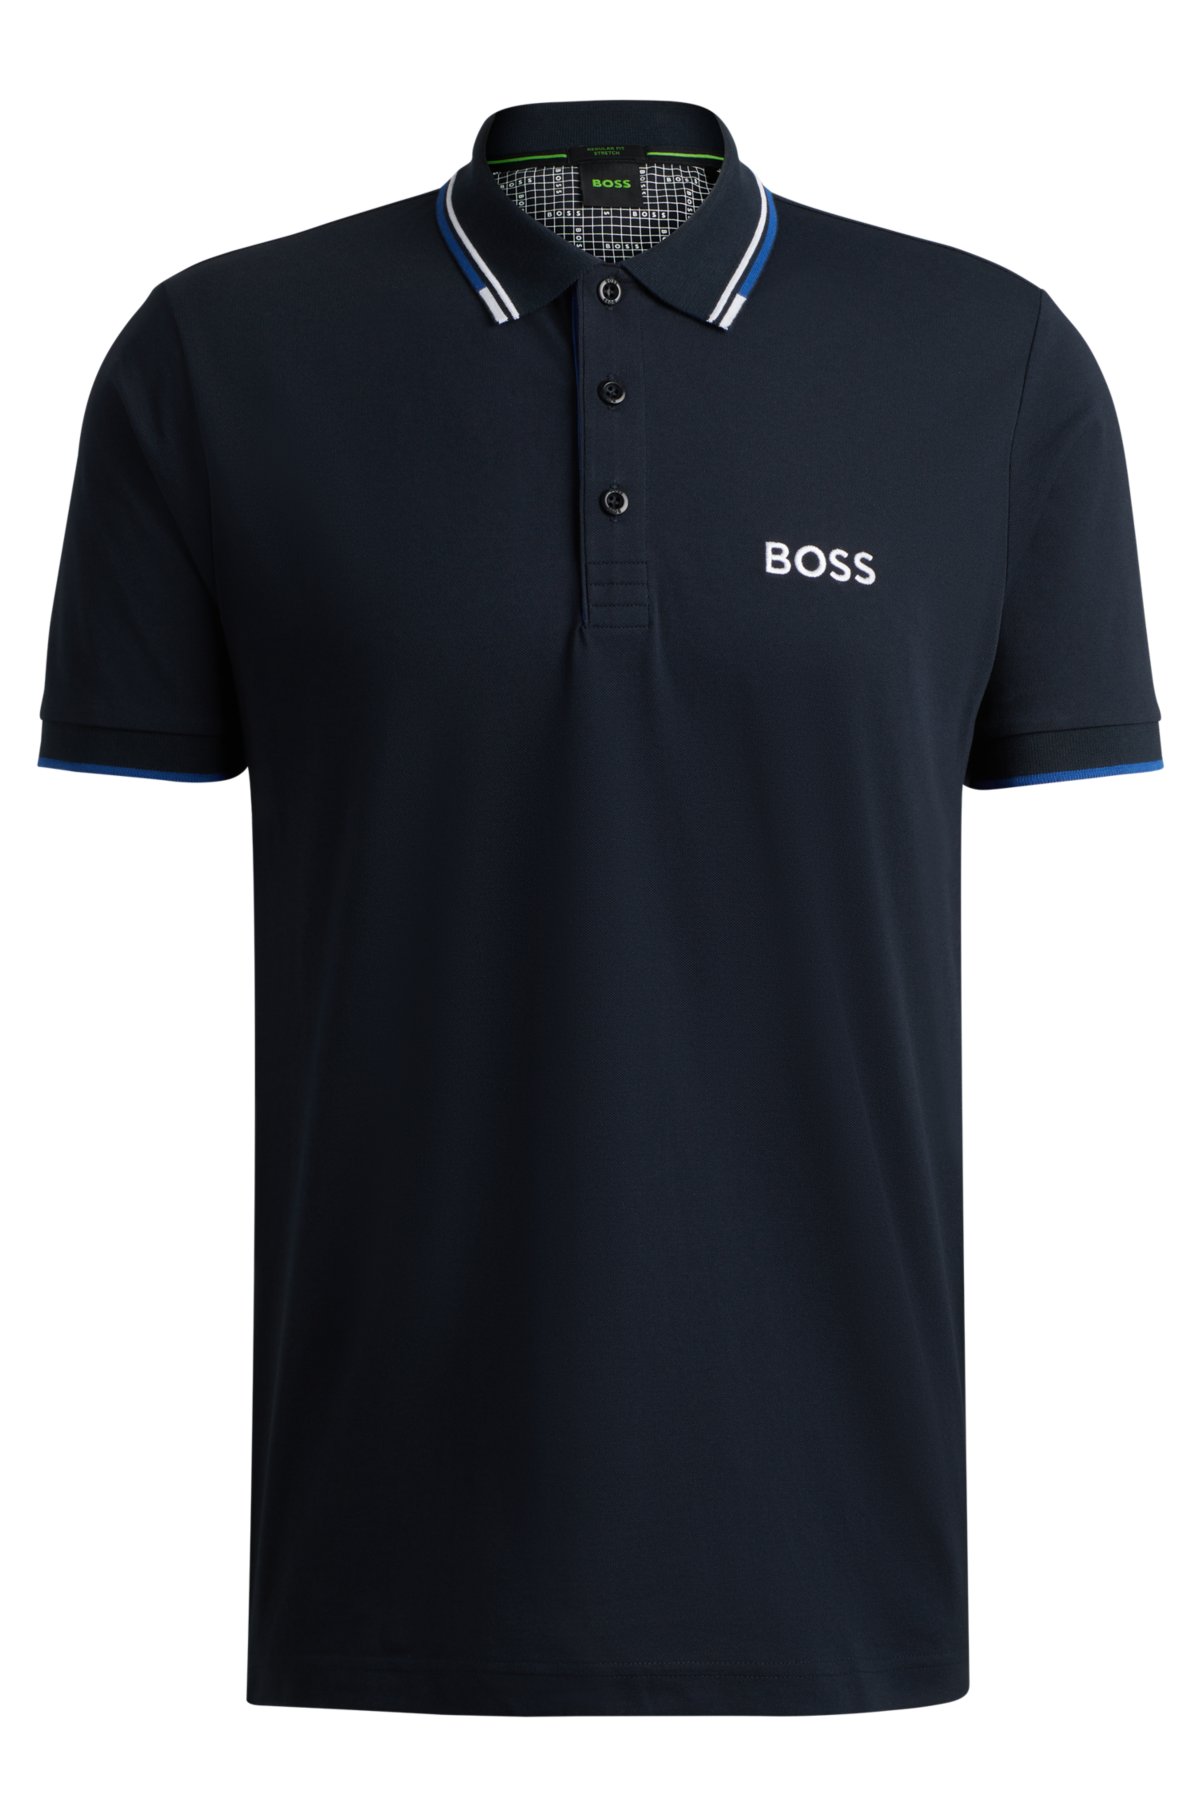 logos contrast Cotton-blend shirt - polo with BOSS